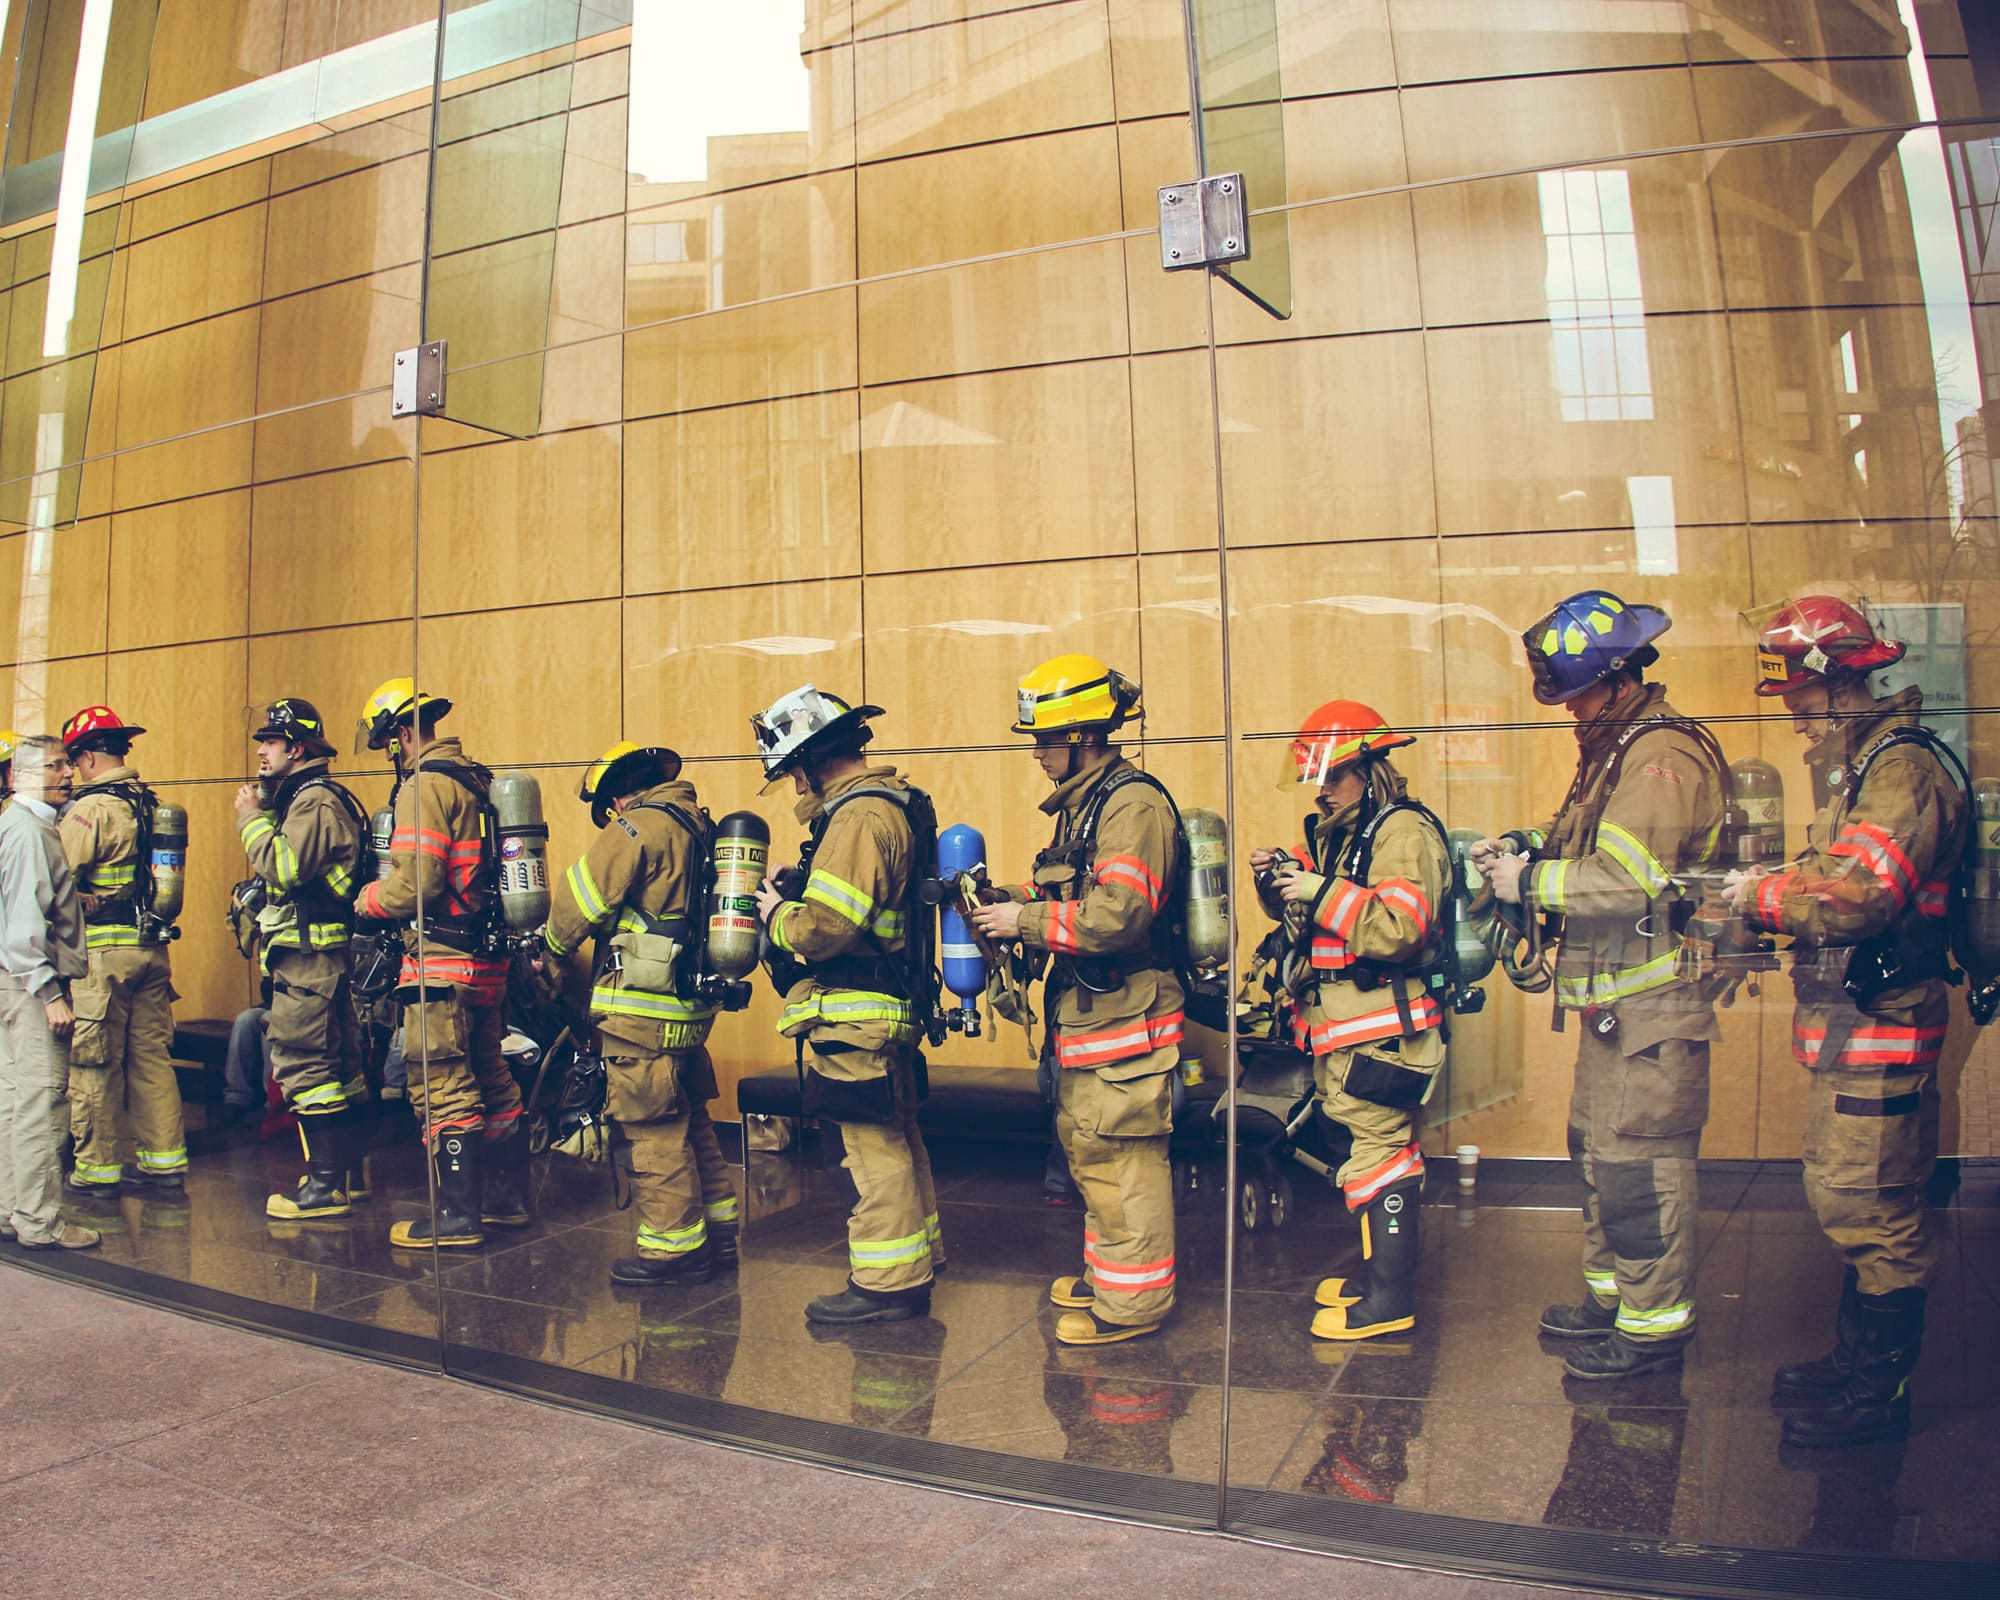 Firefighters wait to start the 22nd annual Scott Firefighter Stair Climb to benefit the Washington/Alaska Chapter of the Leukemia &amp; Lymphoma Society.